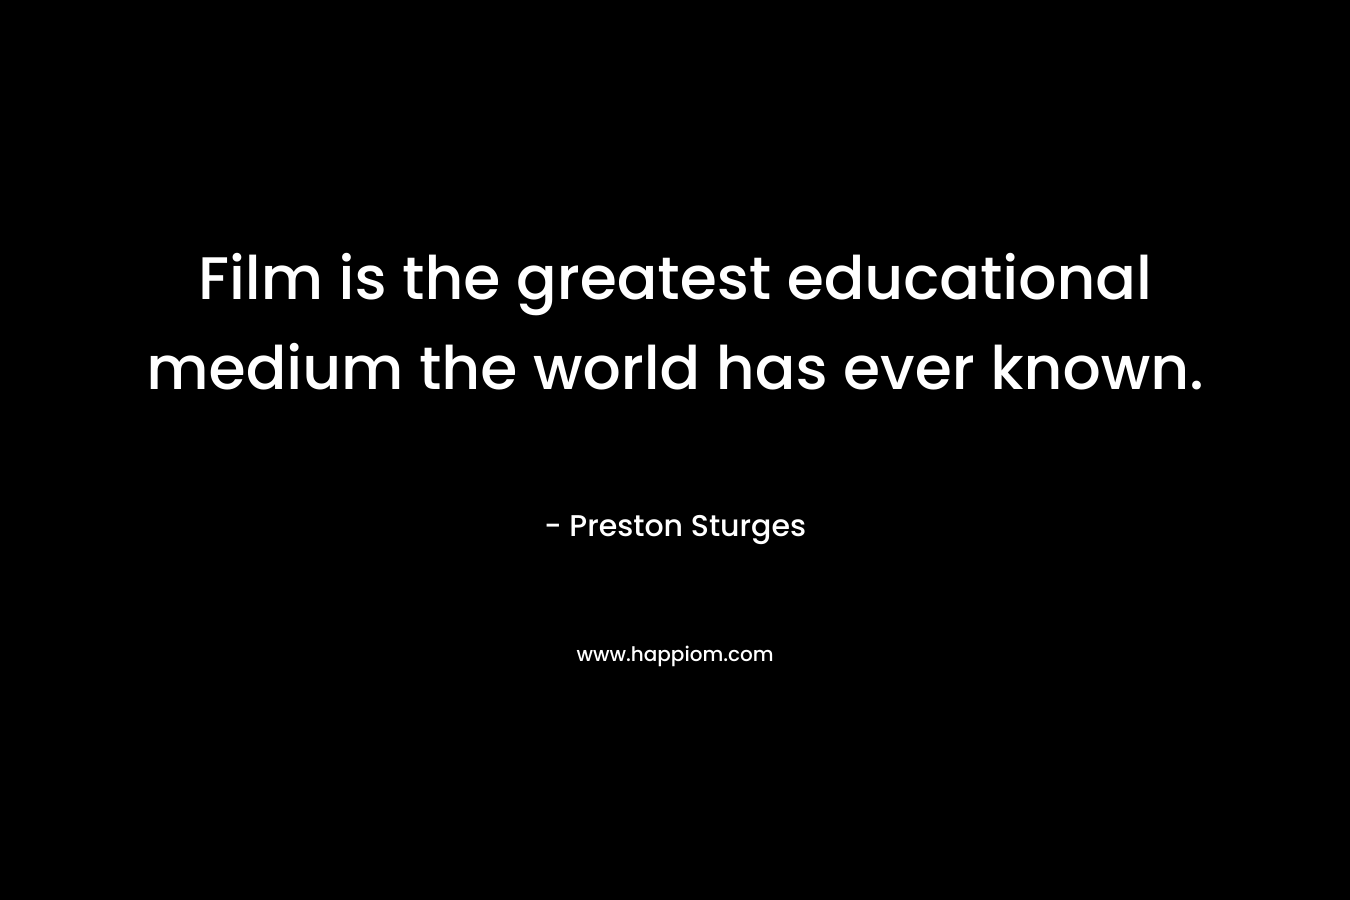 Film is the greatest educational medium the world has ever known.